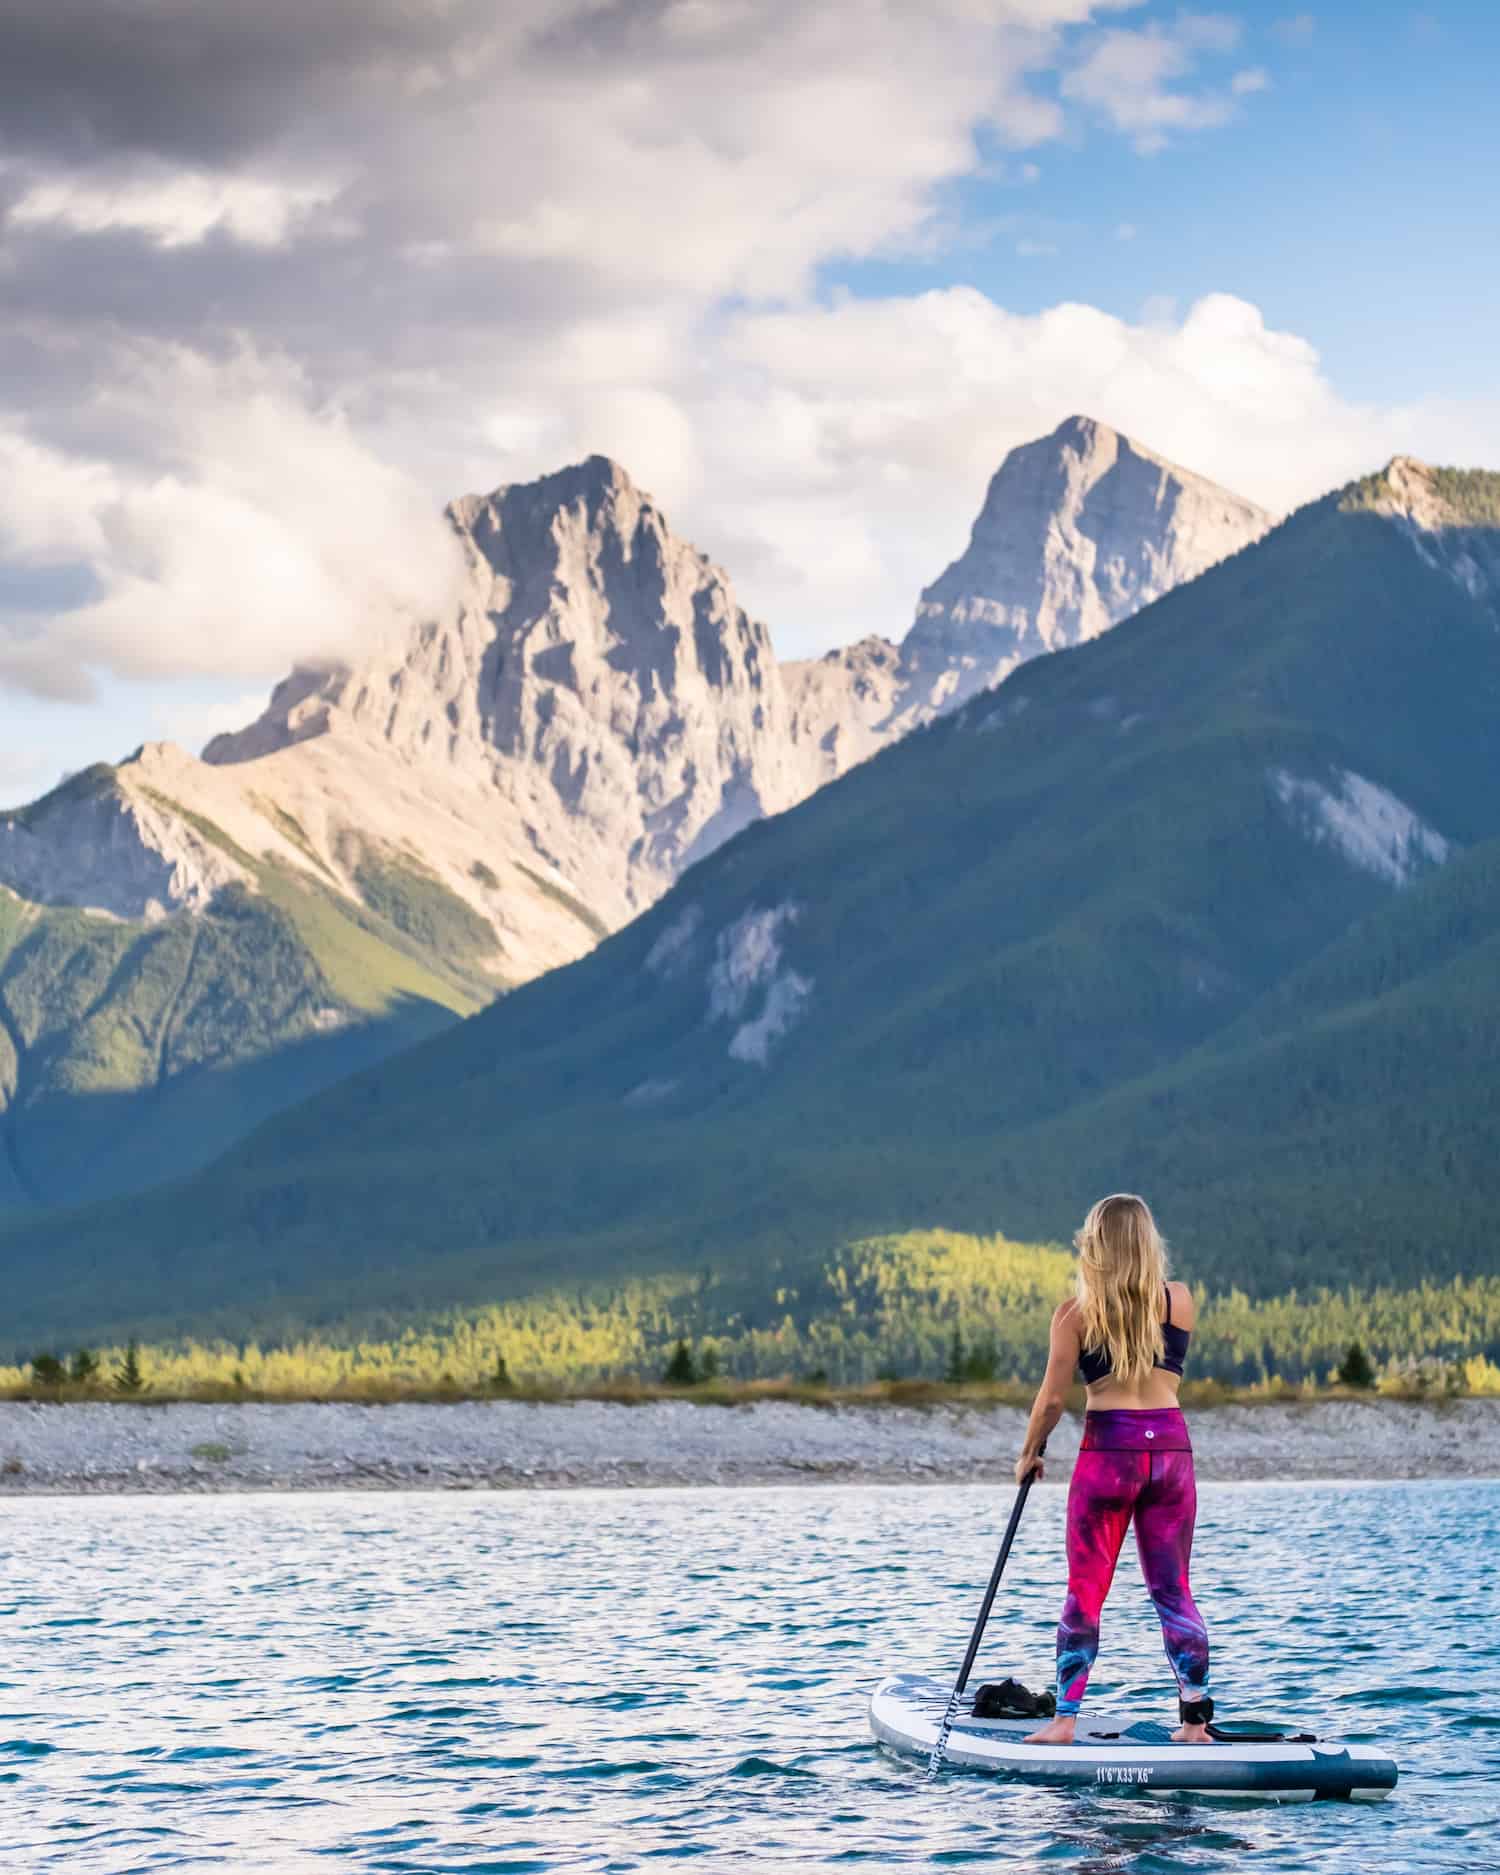 Stand up paddle boarding in Canmore - Rundle Forebay Reservoir